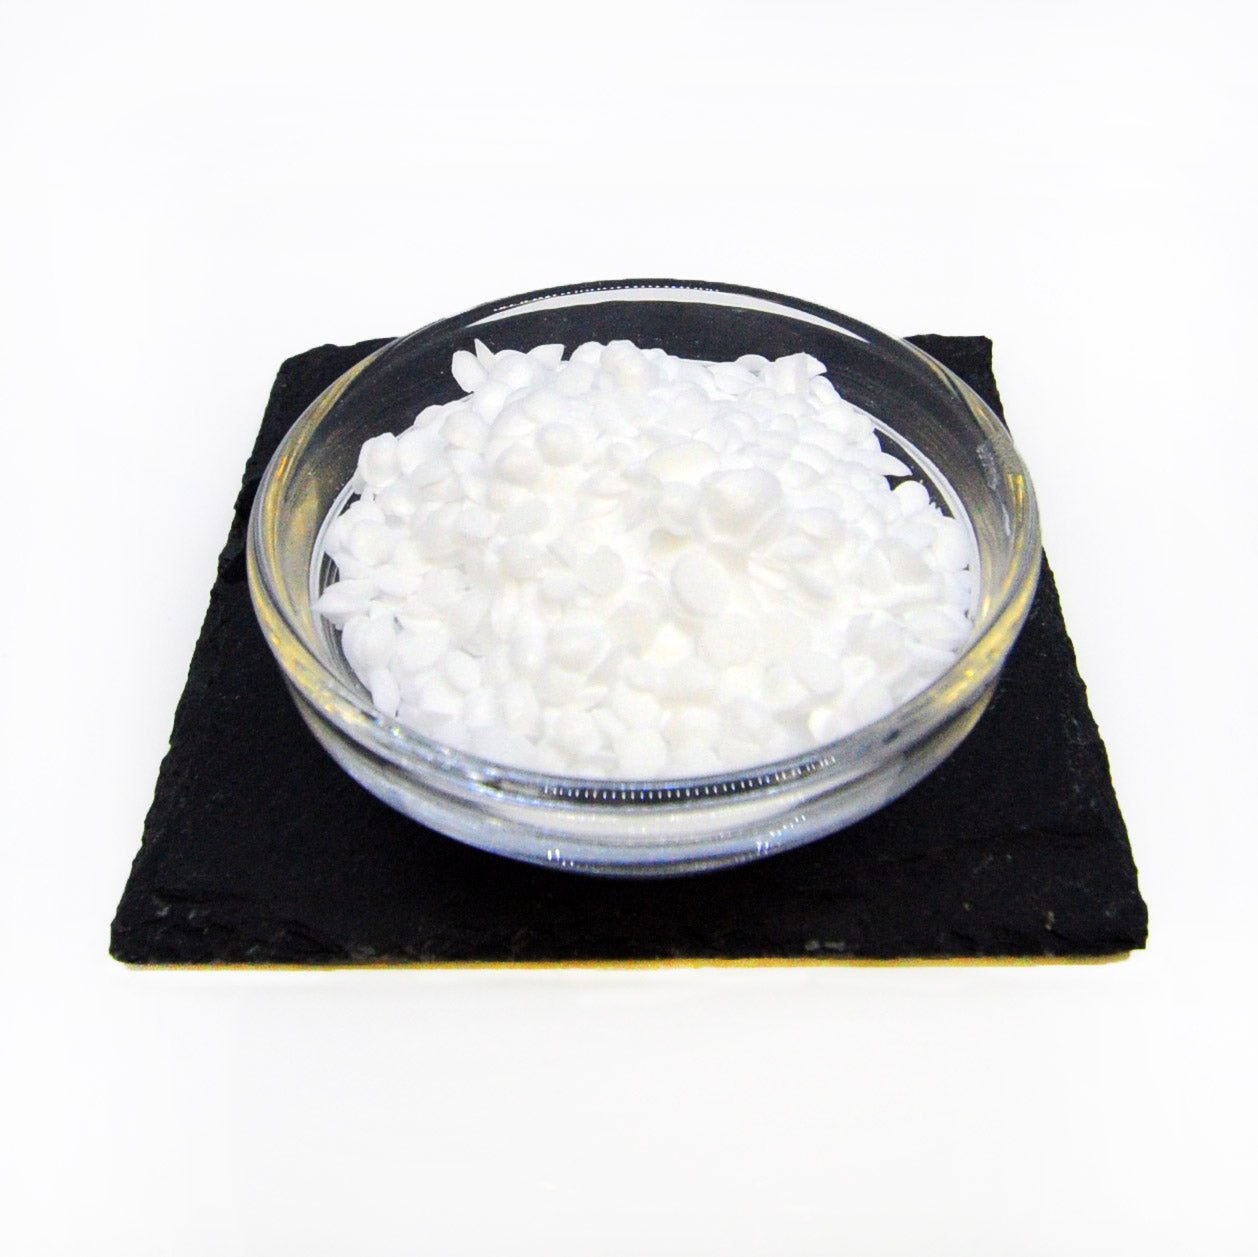 Cetyl Alcohol NF